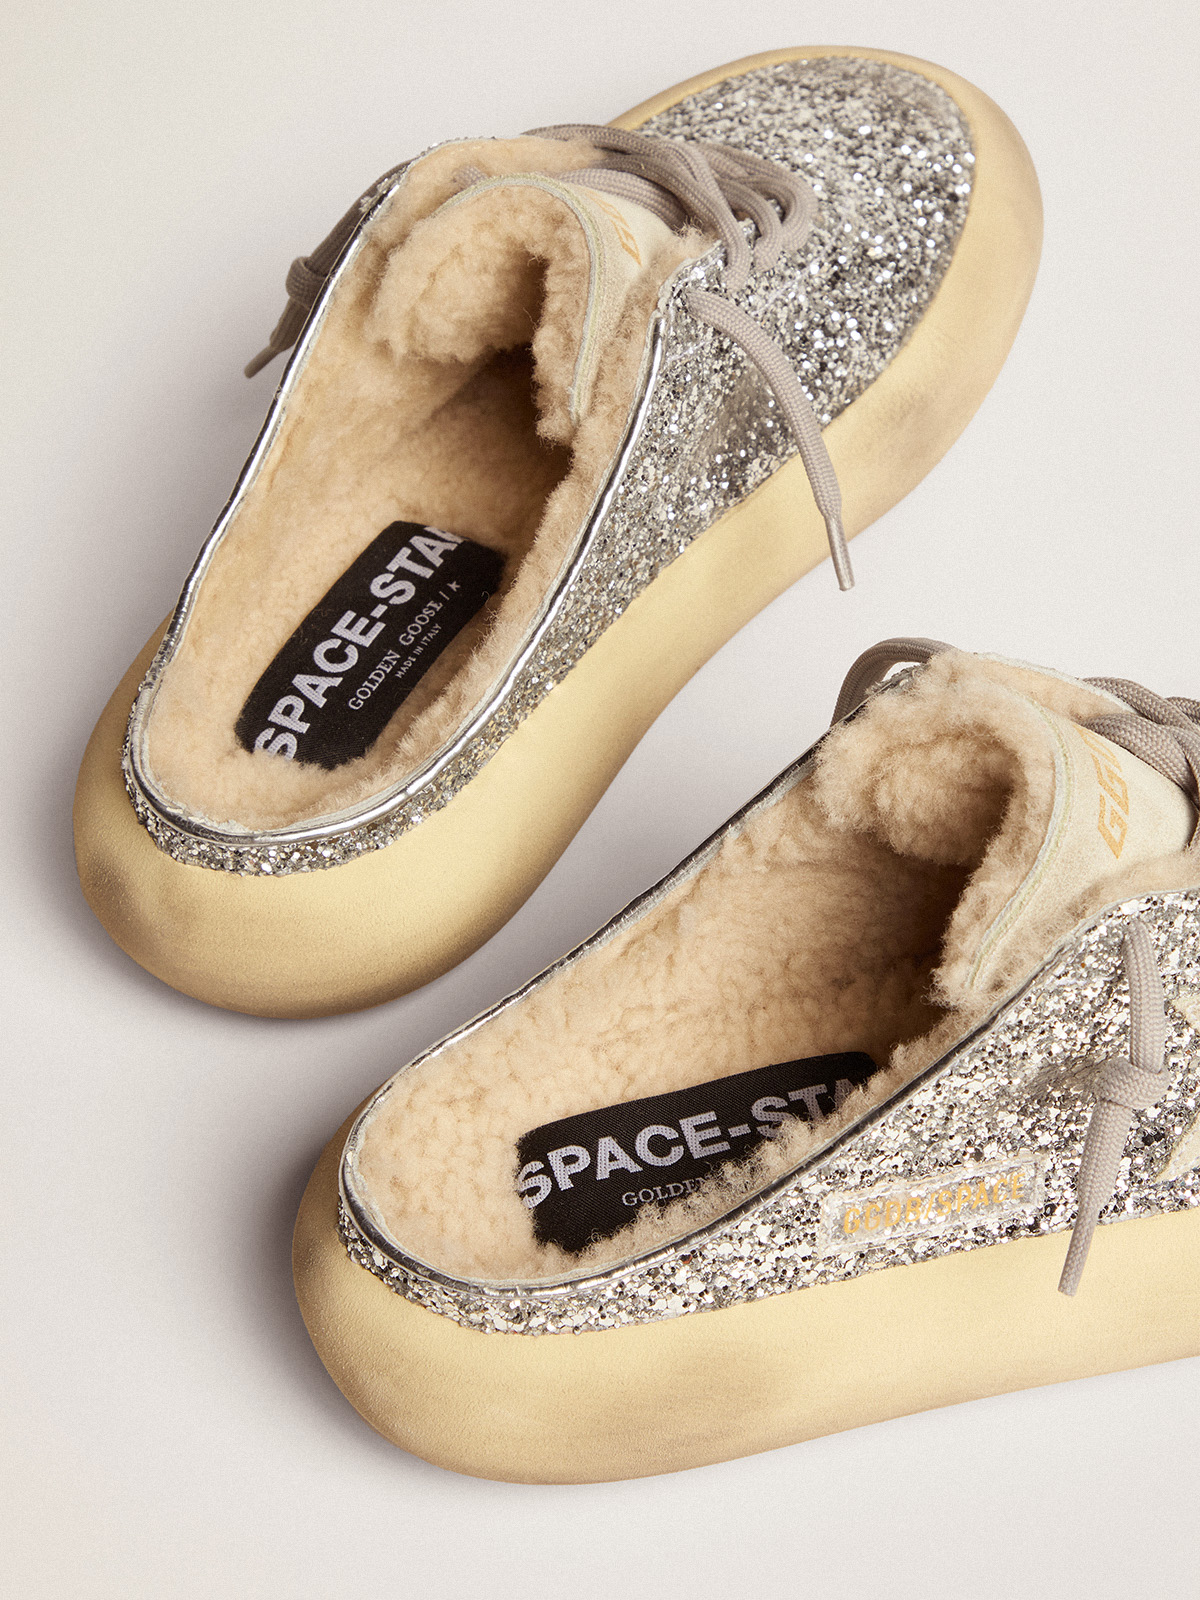 Women\'s Space-Star Sabot in silver glitter and shearling lining | Golden  Goose